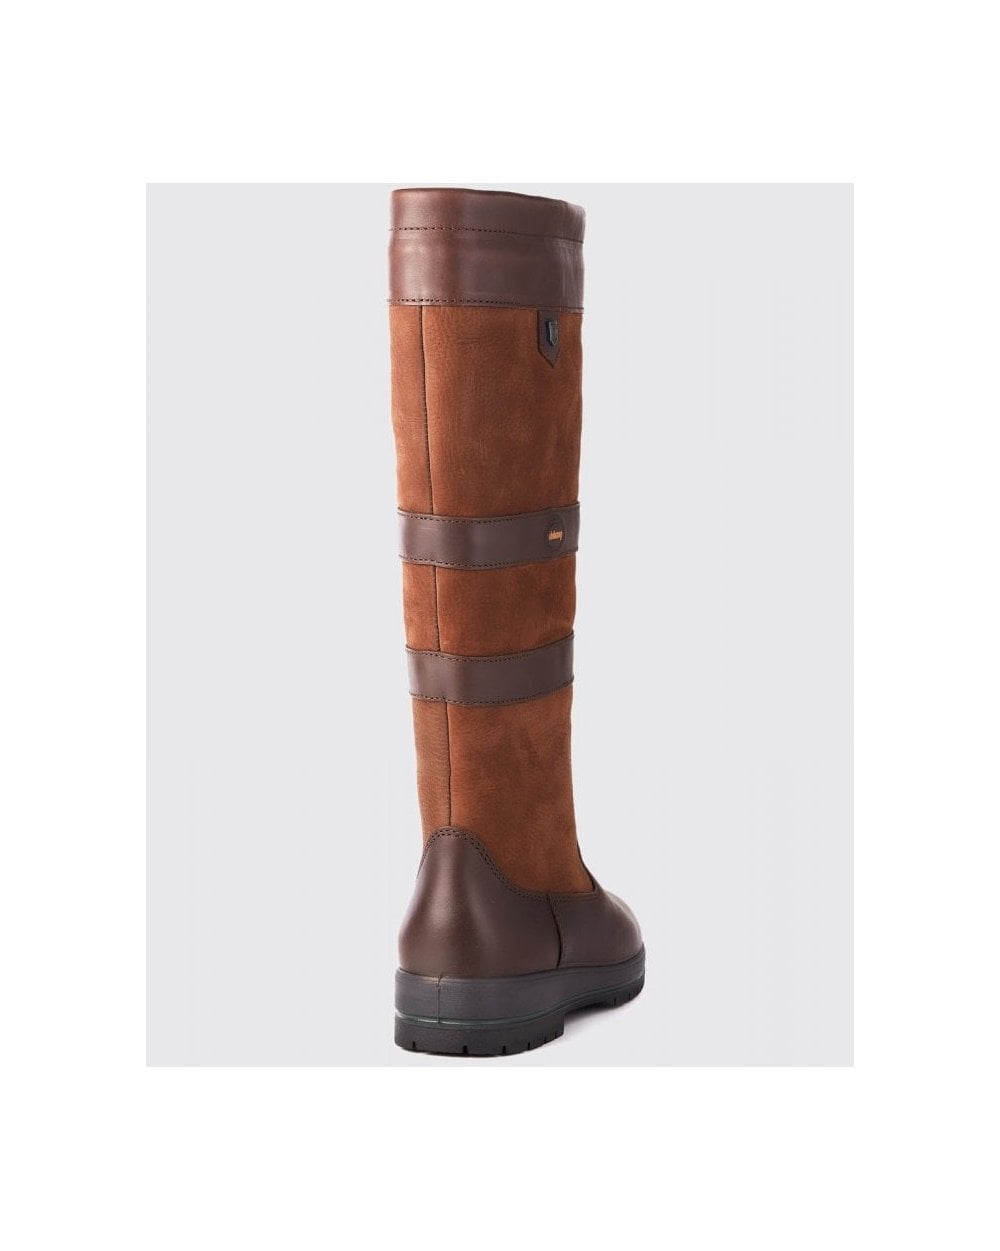 Galway Country Boot Extra Fit Walnut